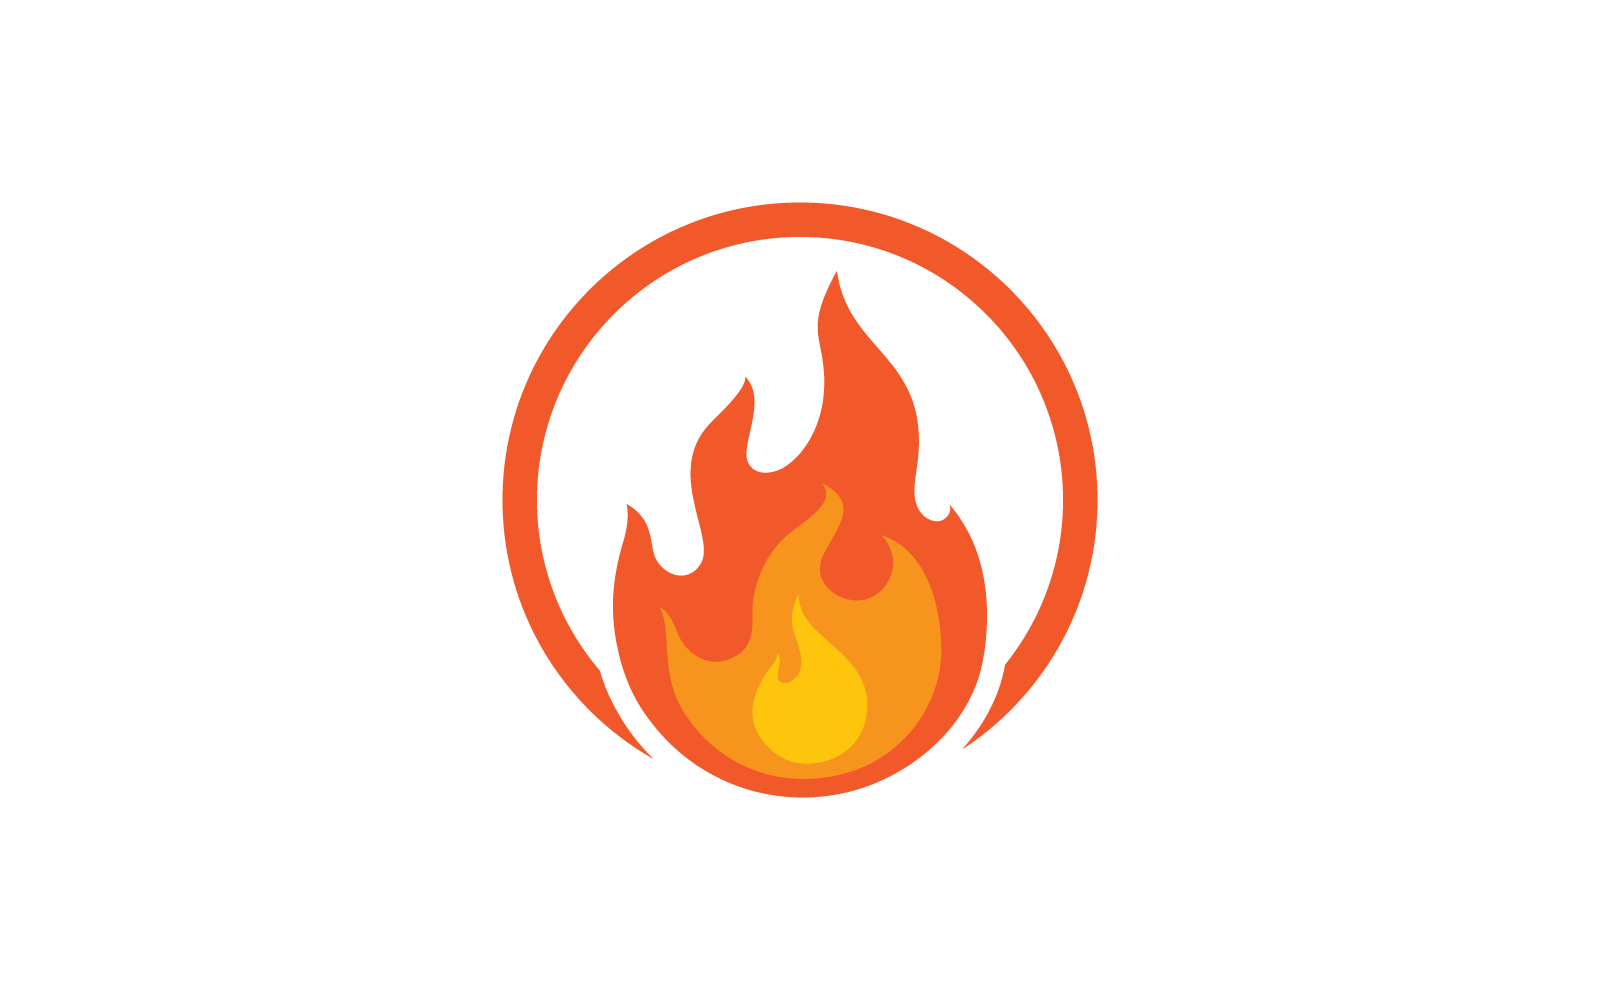 Fire flame vector, Oil, gas and energy logo design illustration concept